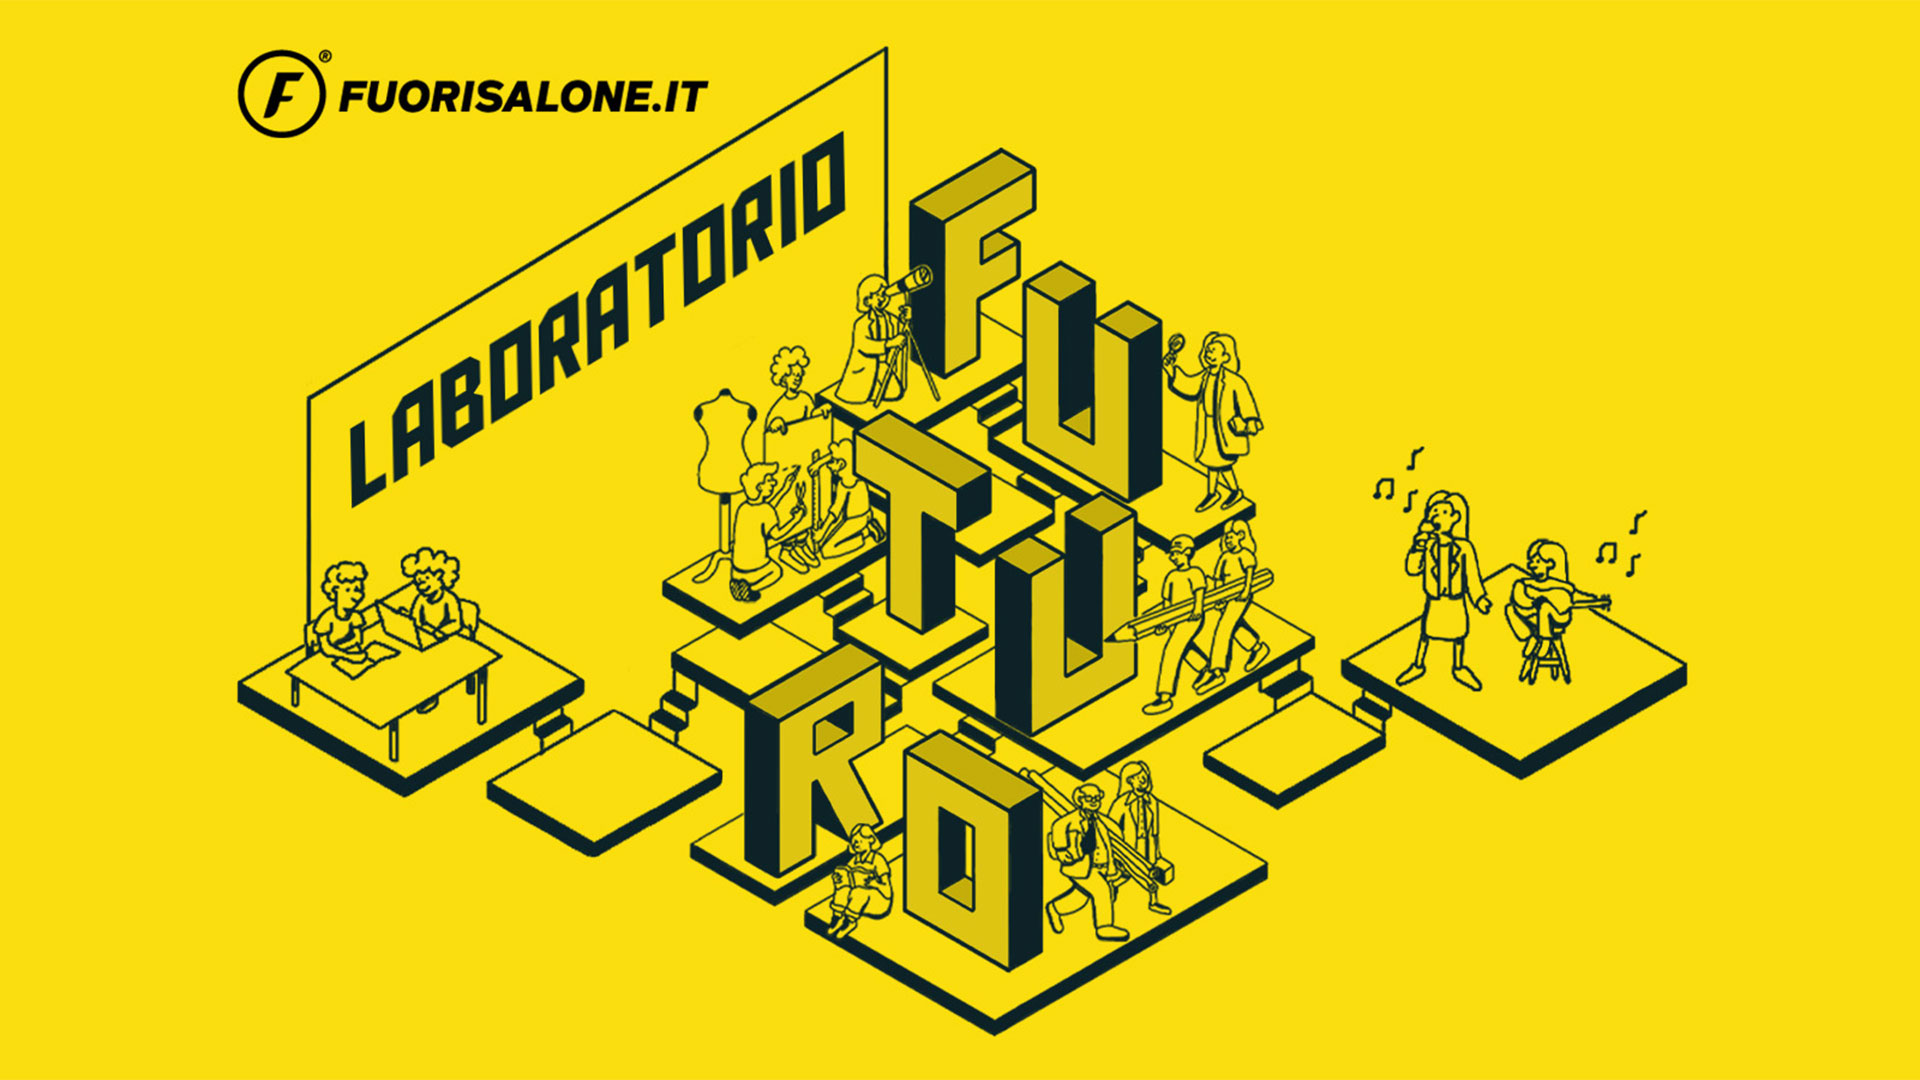 Salone Del Mobile returns in April with sustainability focus - Design Week